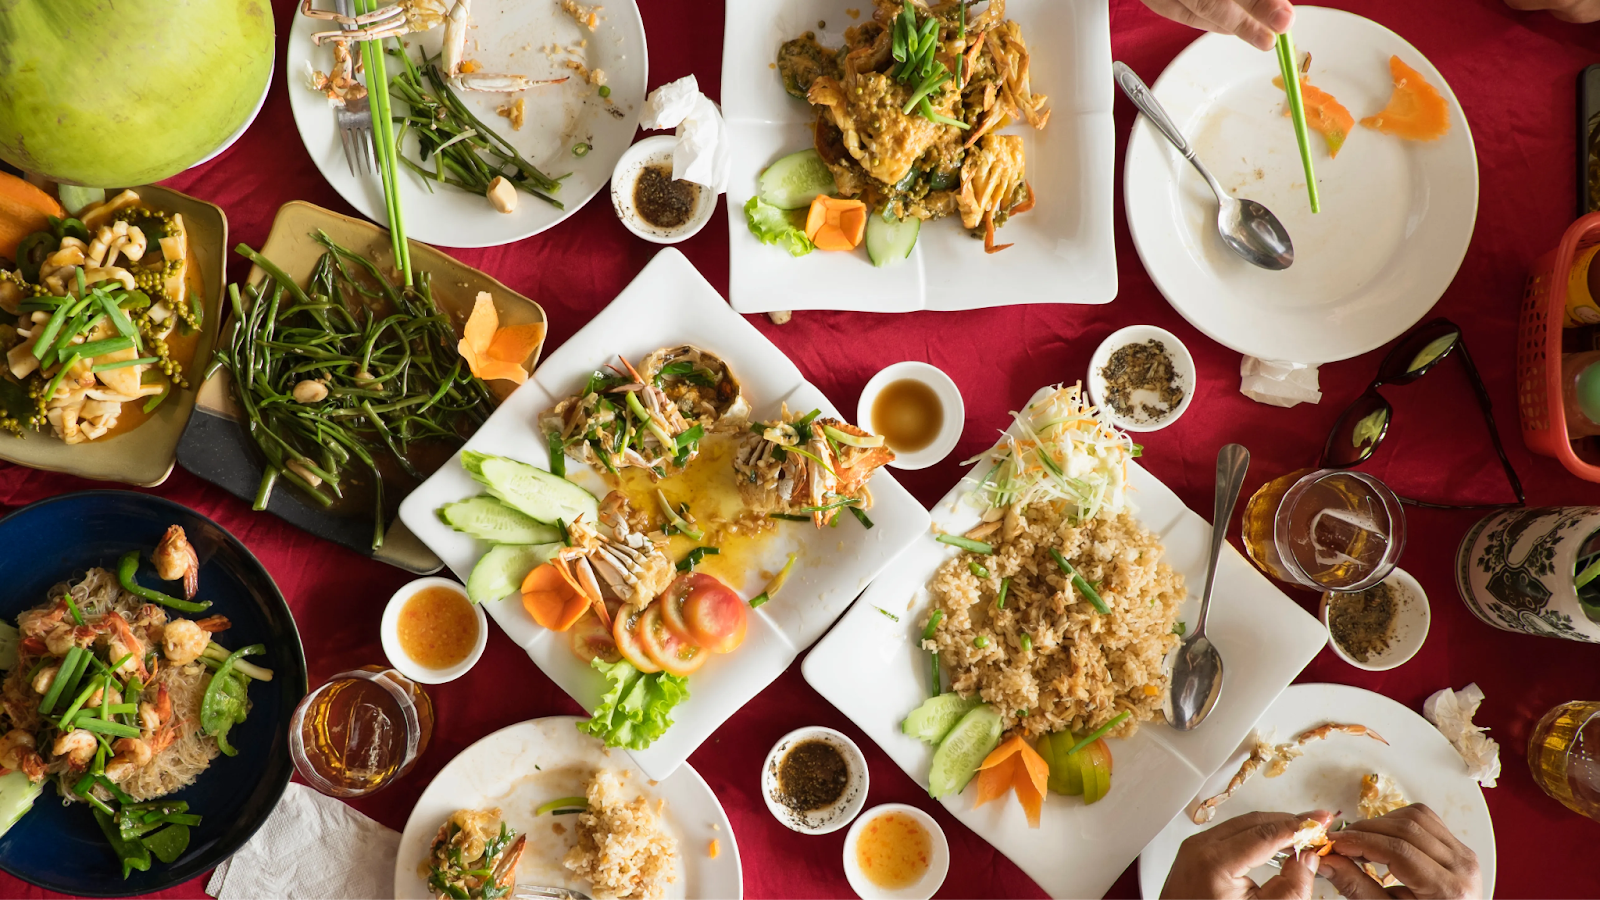 Cambodia has a rich and vibrant cuisine 